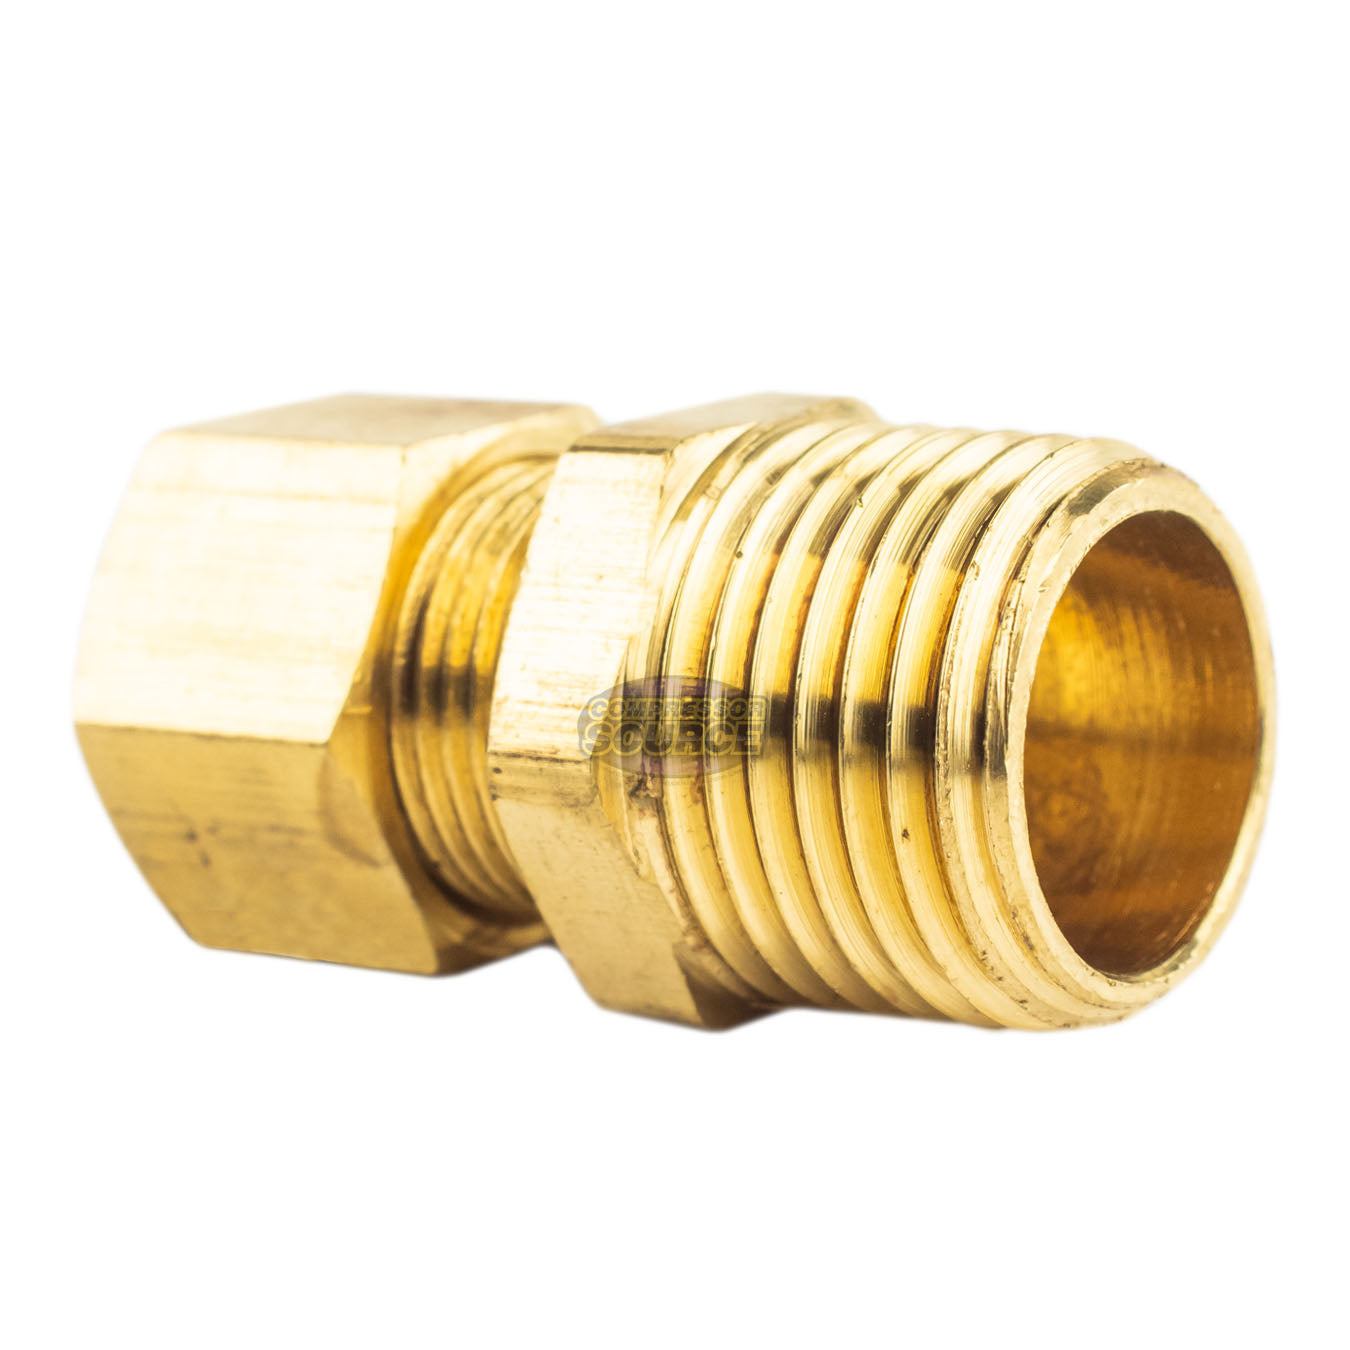 2 Pack 1/2" x 1/2" Male NPT Connector Brass Compression Fitting for 1/2" OD Tube